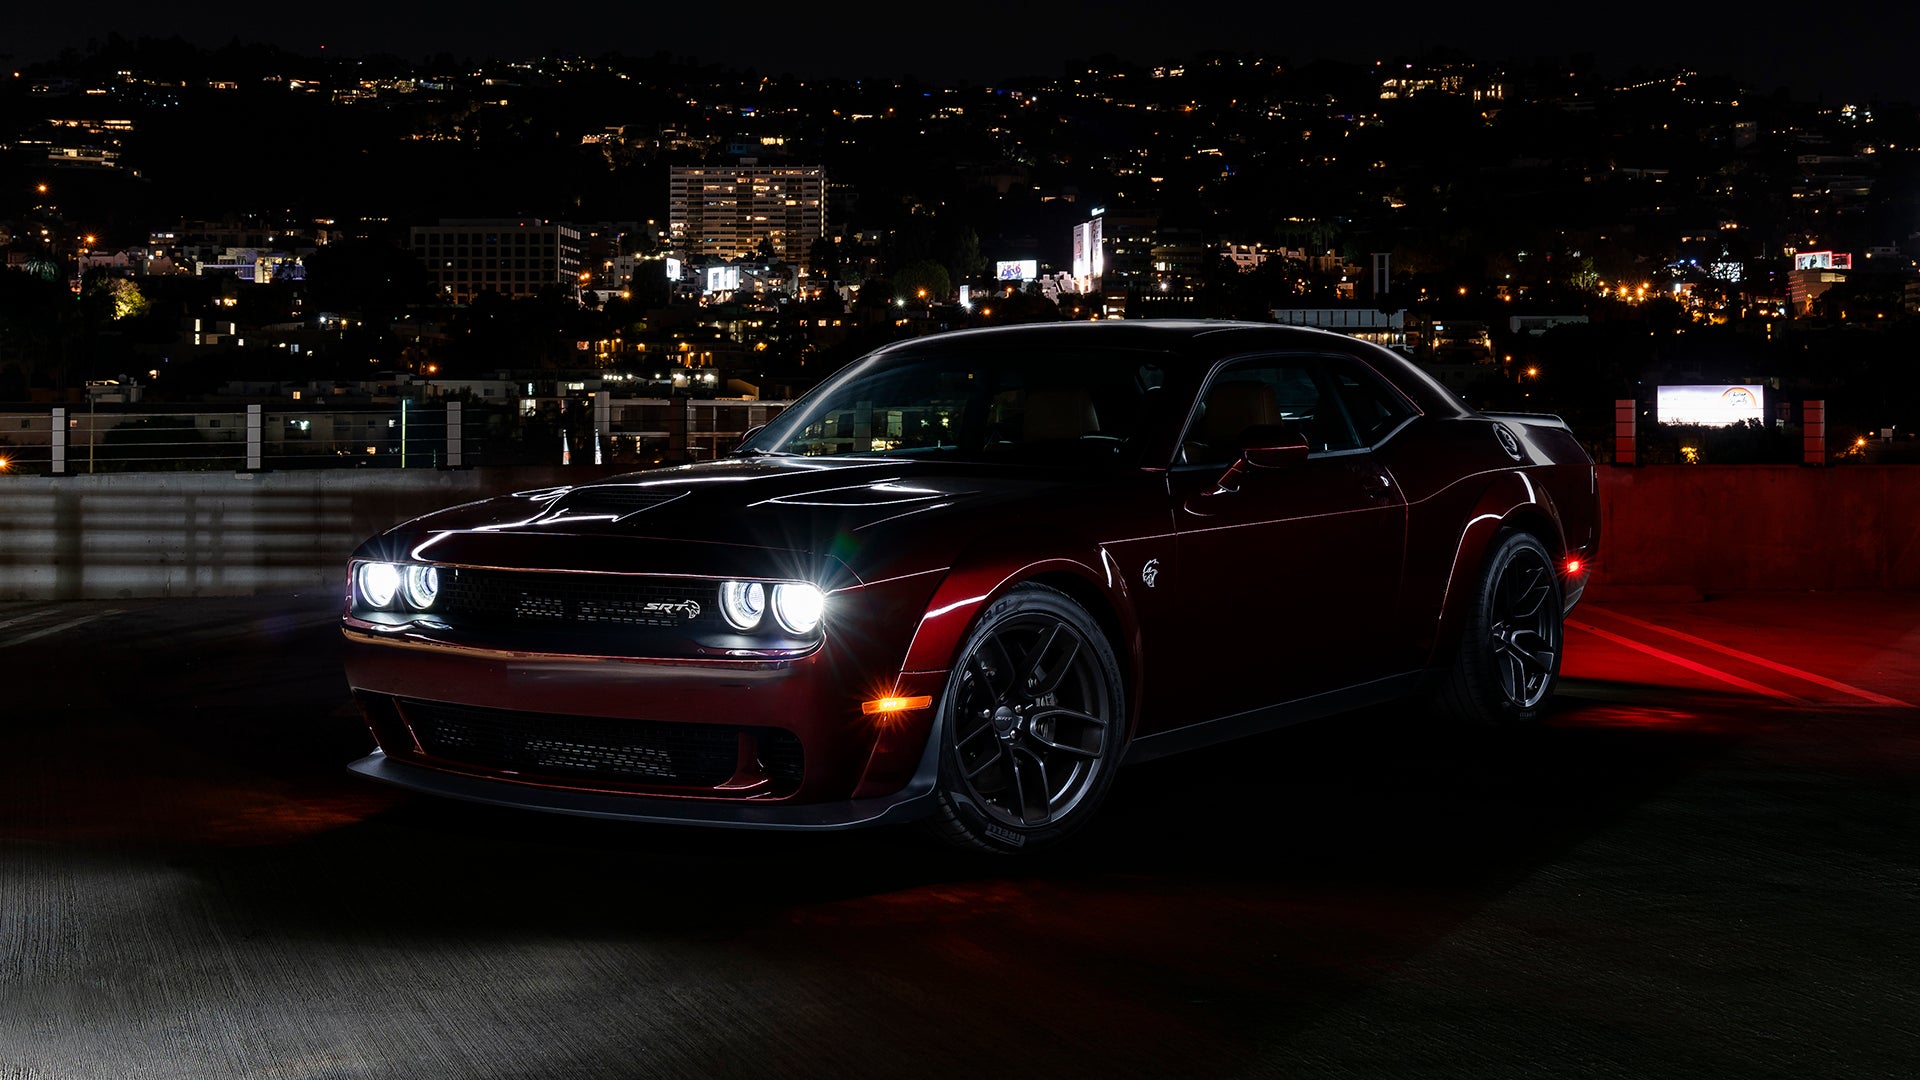 2018 Dodge Challenger SRT Hellcat Widebody Group Review: Gray Temples Do This Muscle Car No Harm